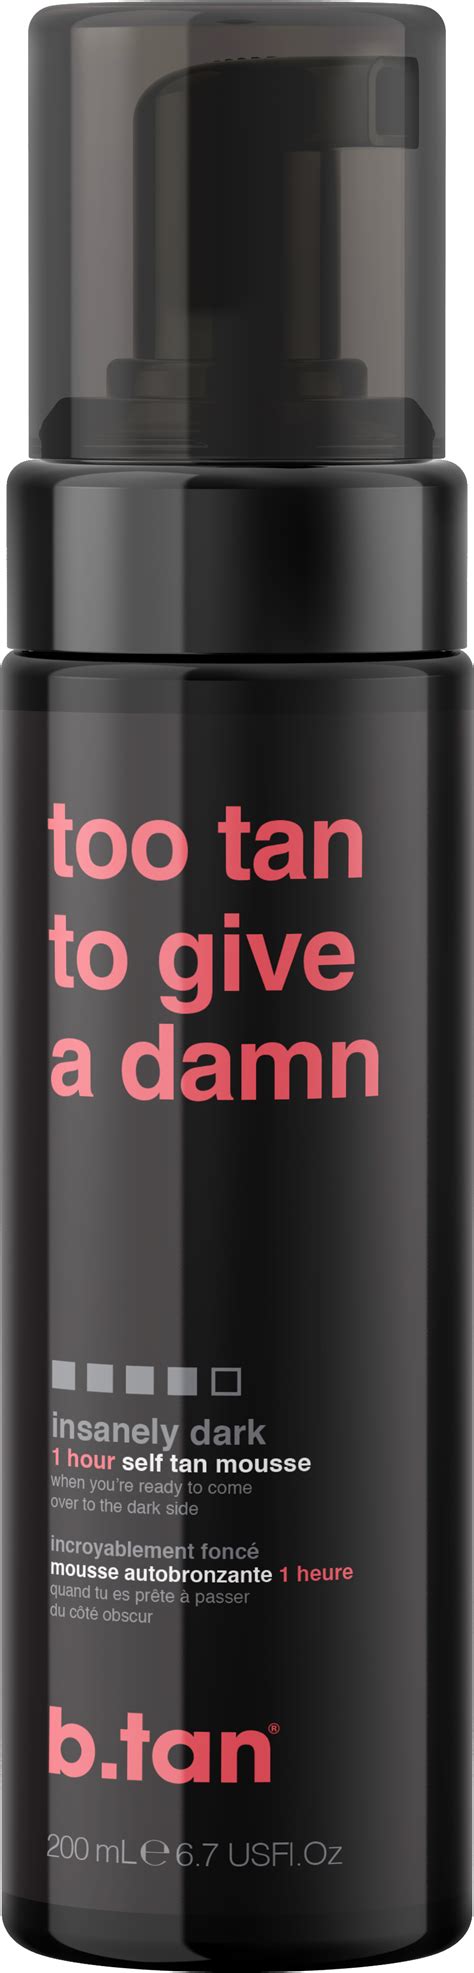 B Tan Self Tanning Mousse Too Tan To Give A Damn 200 Ml 9 49 EUR